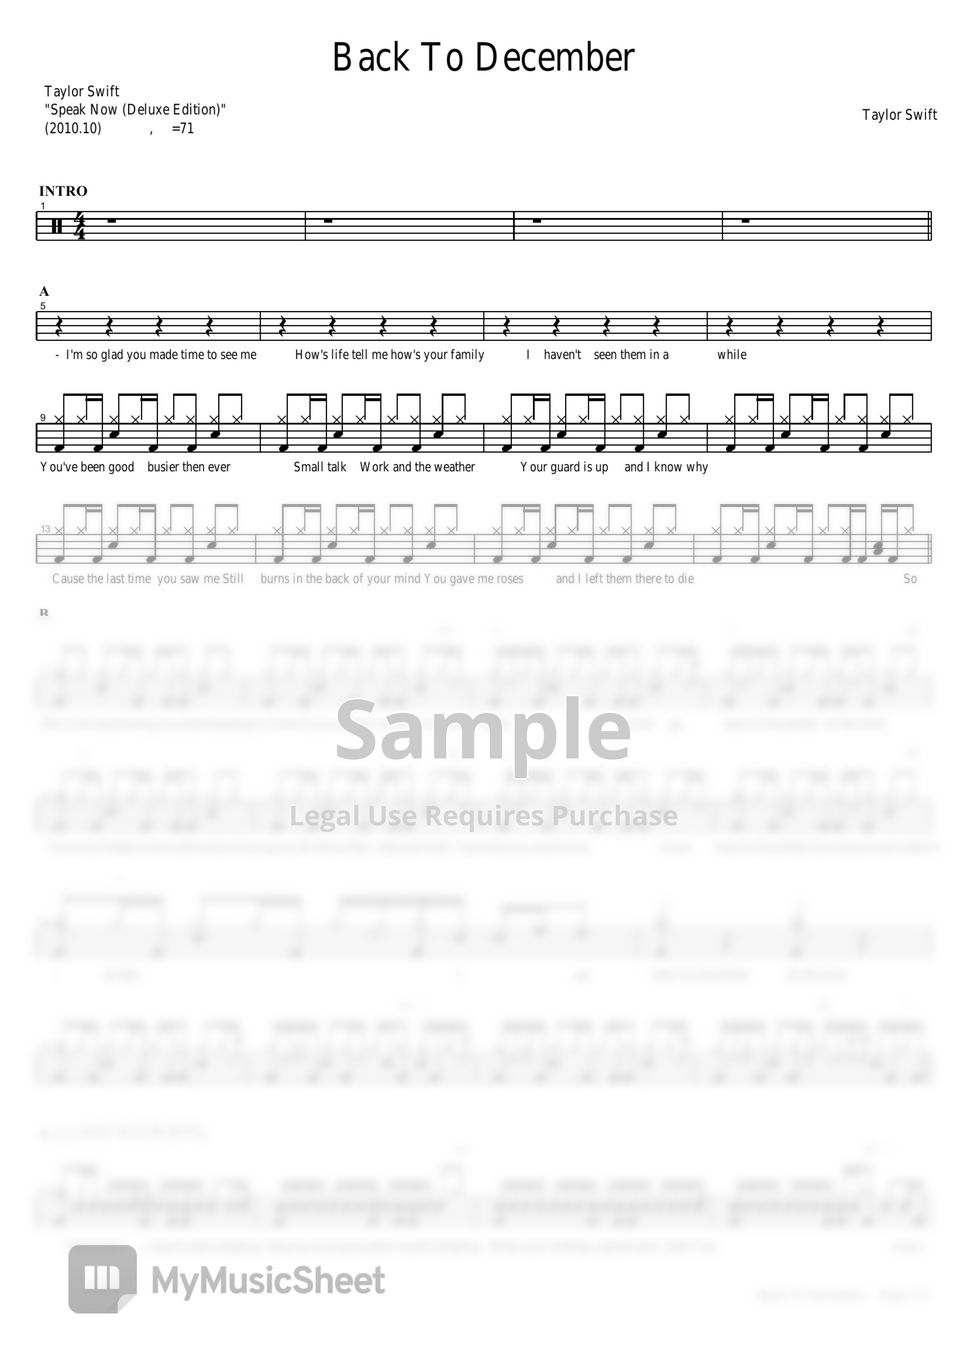 Taylor Swift - Back To December by COPYDRUM